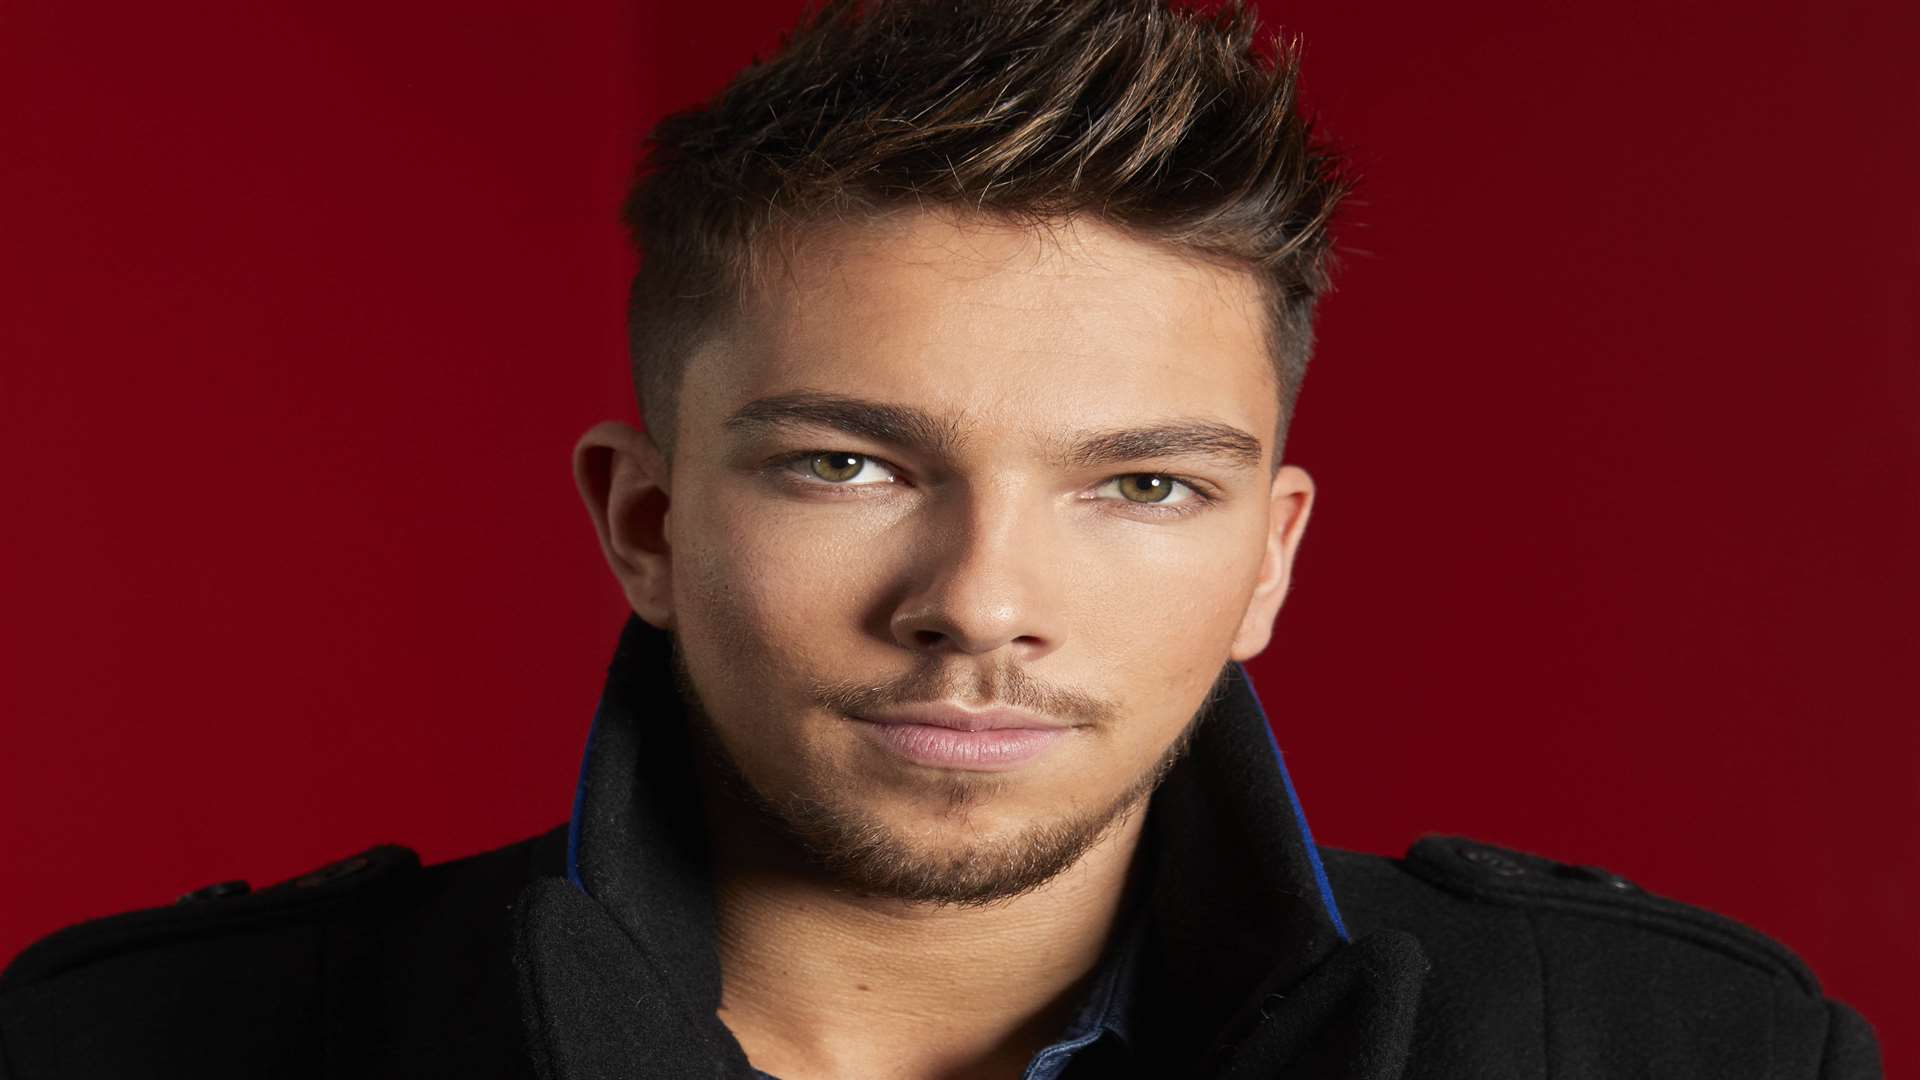 Matt Terry was announced as the winner of this year's X Factor Picture: Freemantle Media